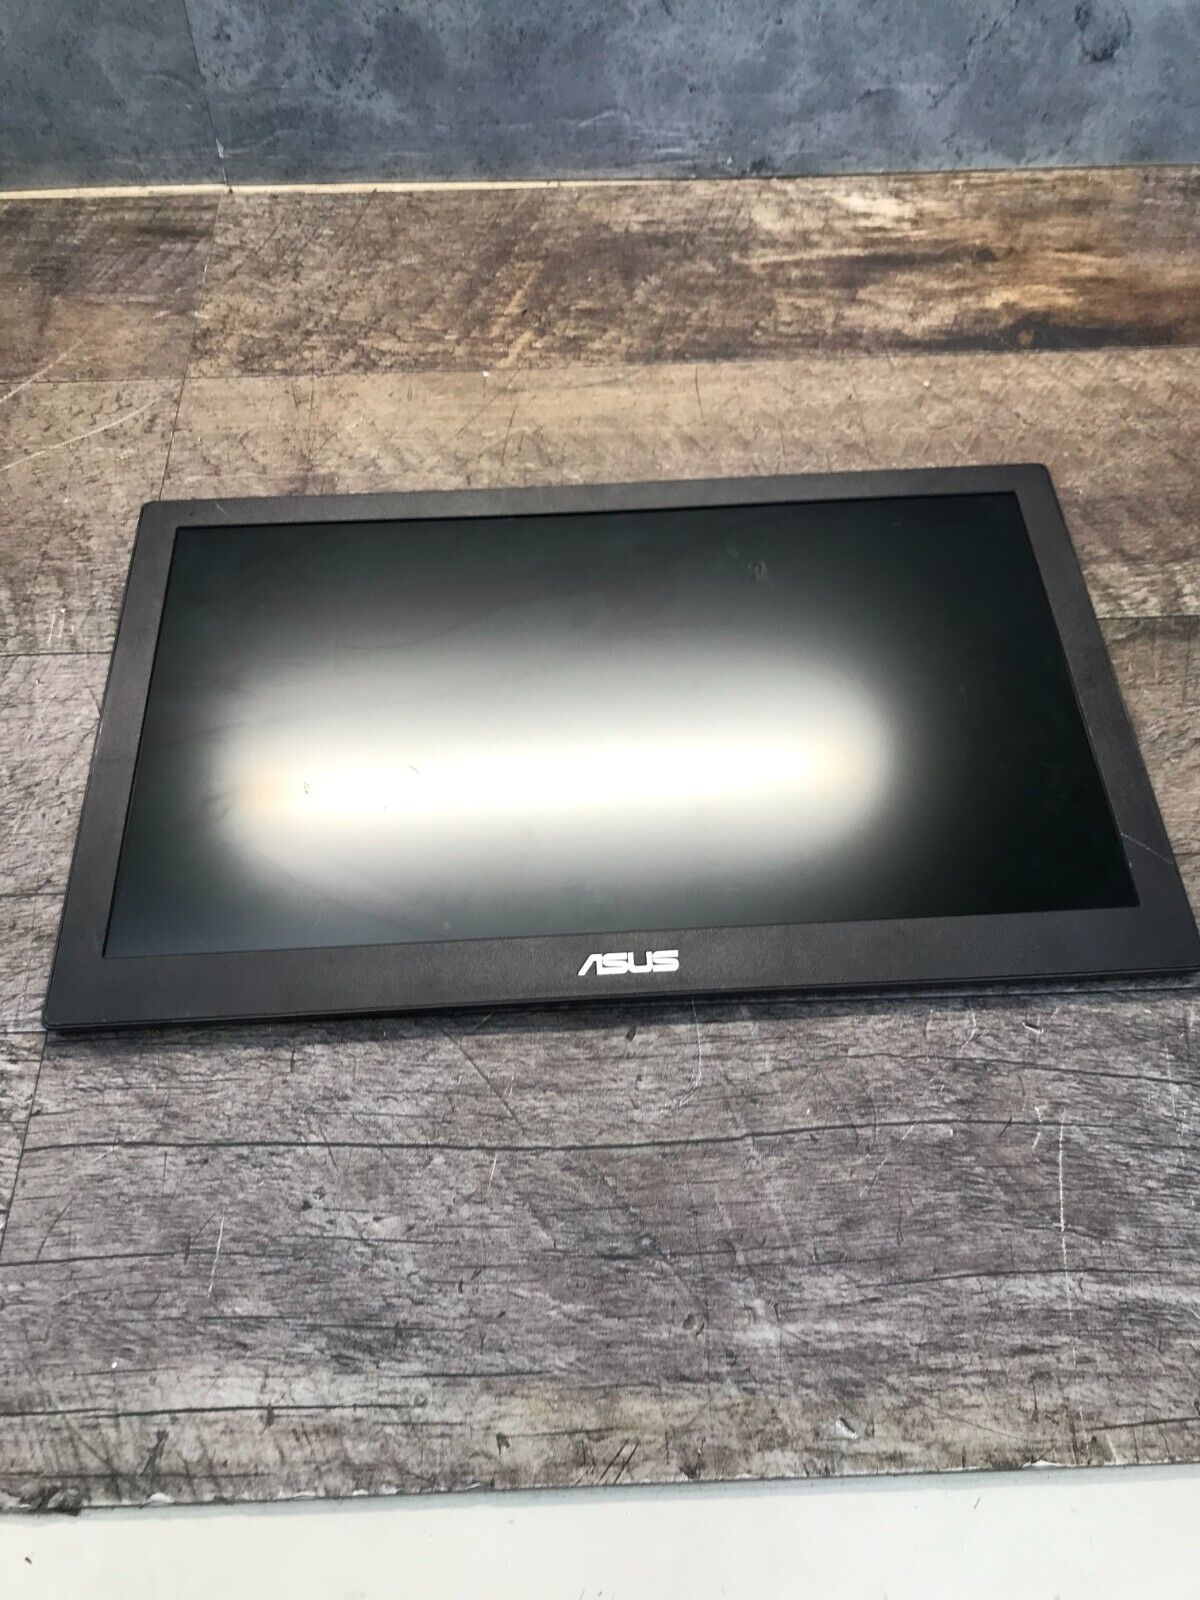 ASUS MB MB168B 15.6 inch Widescreen LED LCD Monitor *FOR PARTS*